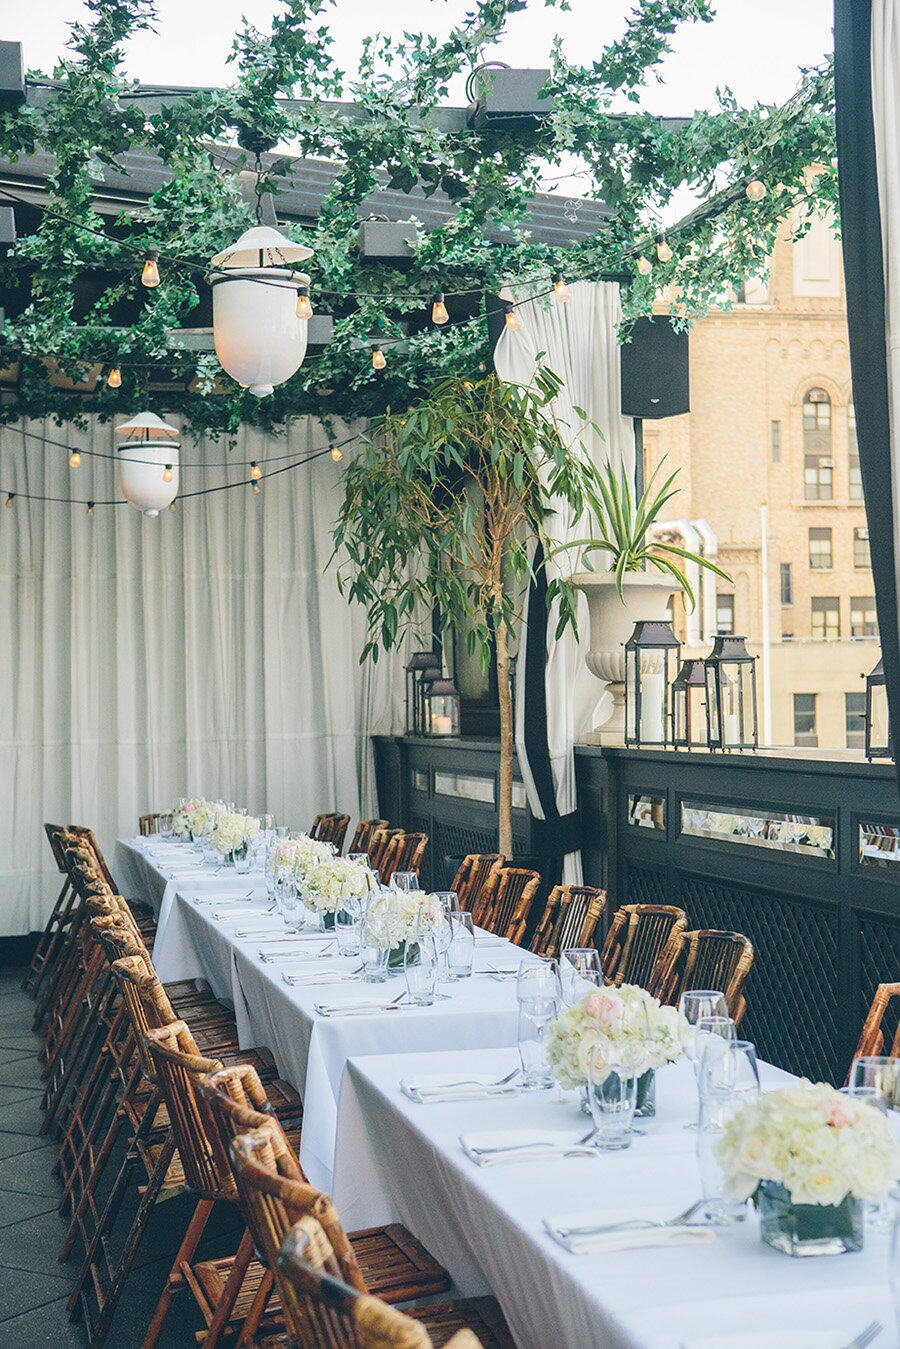 NEW-YORK-CITY-ELOPEMENT-PHOTOGRAPHER-GRAMERCY-TERRACE-INTIMATE-WEDDING-LOCATIONS-SPACES-RECEPTION-SMALL-RECEPTION-0283.jpg